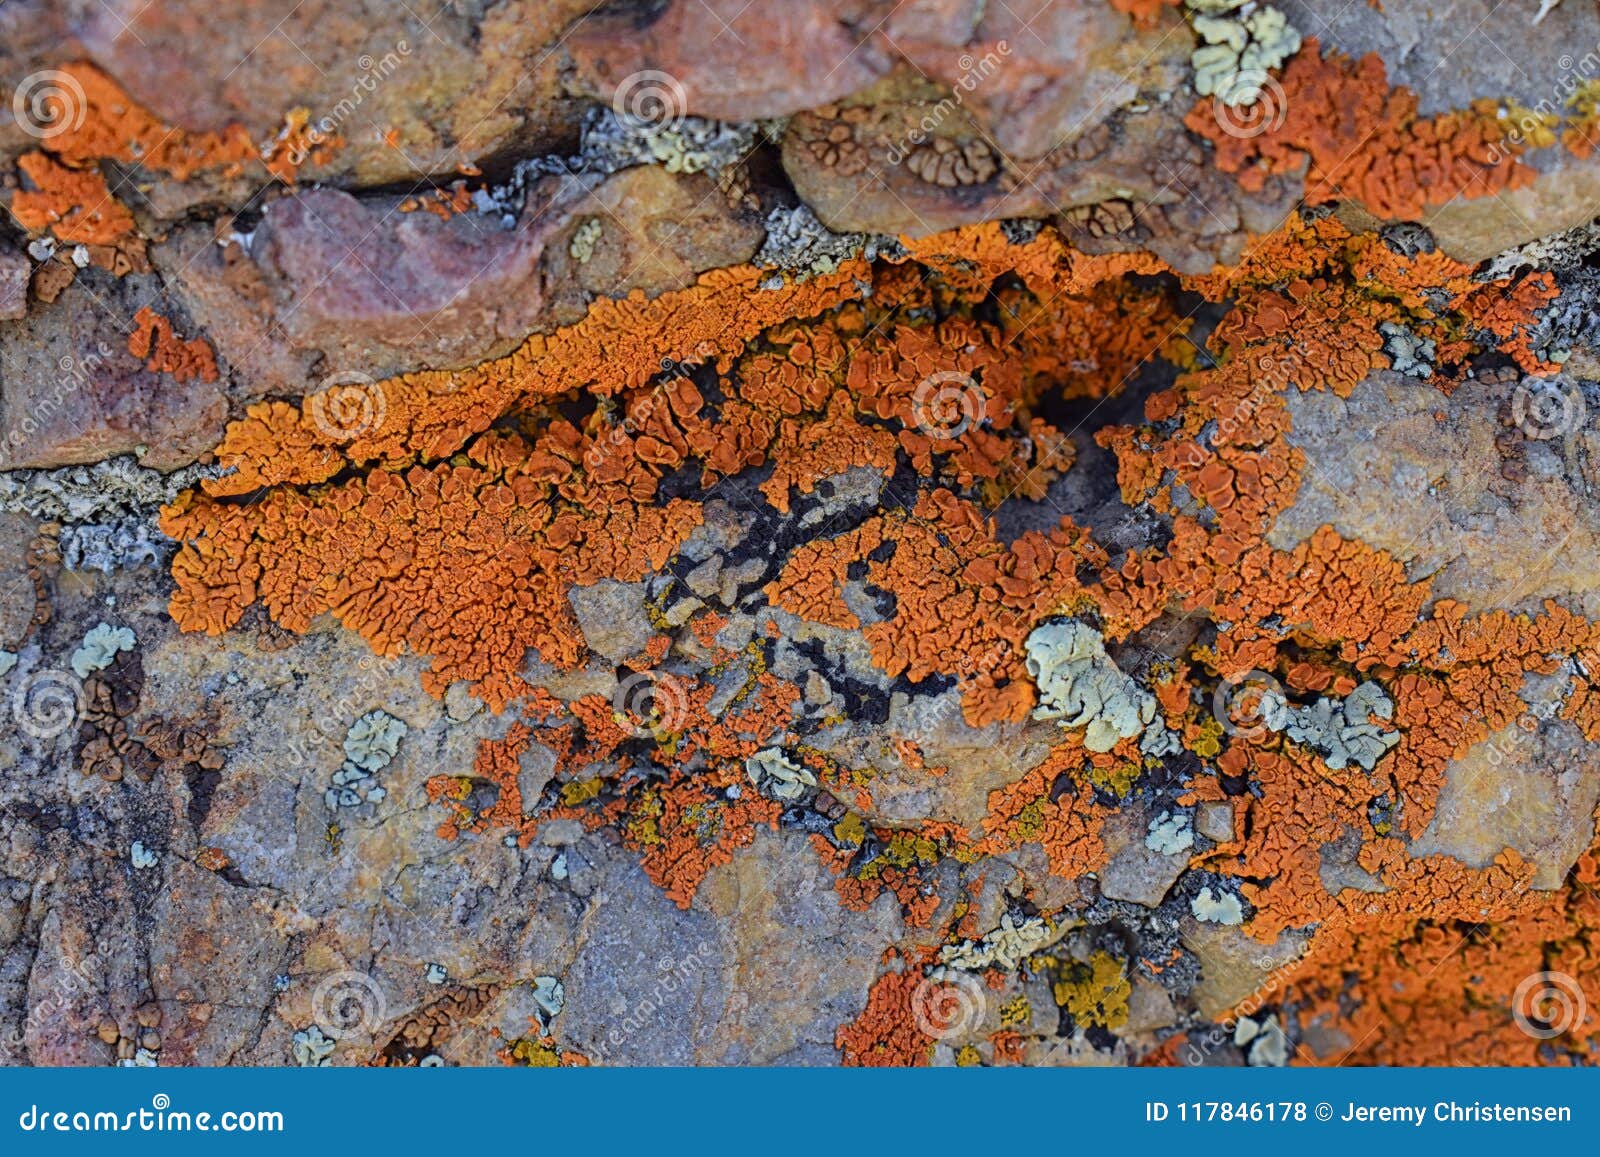 multi color and types crustose lichen organism that arises from algae or cyanobacteria and from fungi on a boulder in the oquirr